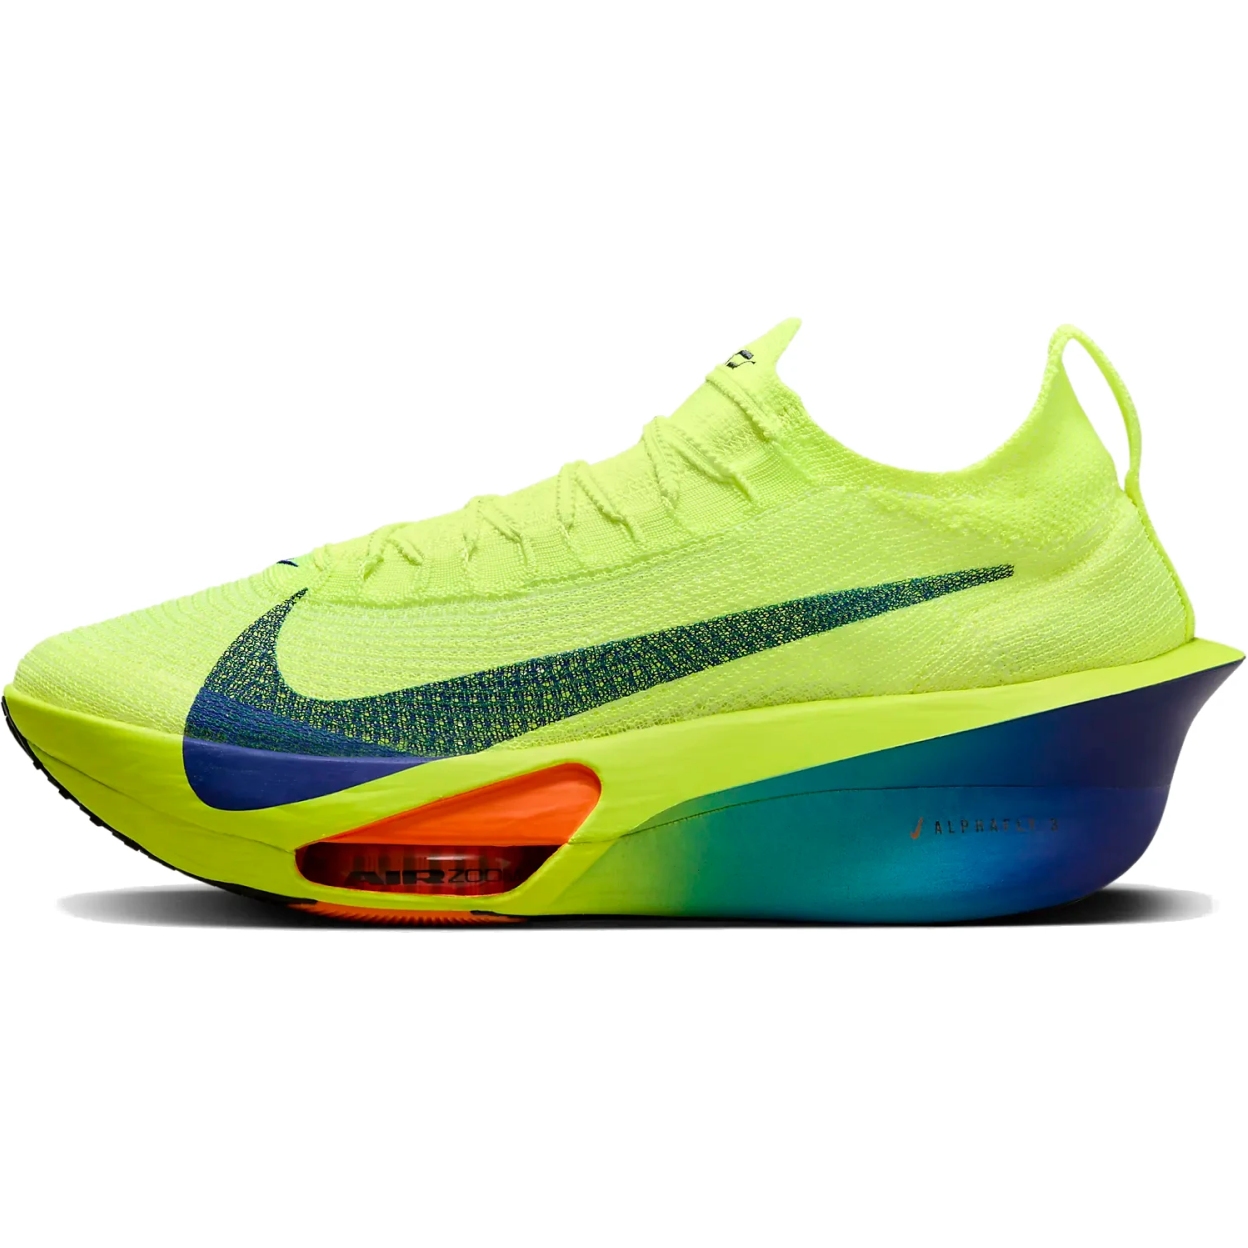 Picture of Nike Air Zoom Alphafly 3 Racing Shoes Men - volt/concord-dusty cactus-total orange FD8311-700